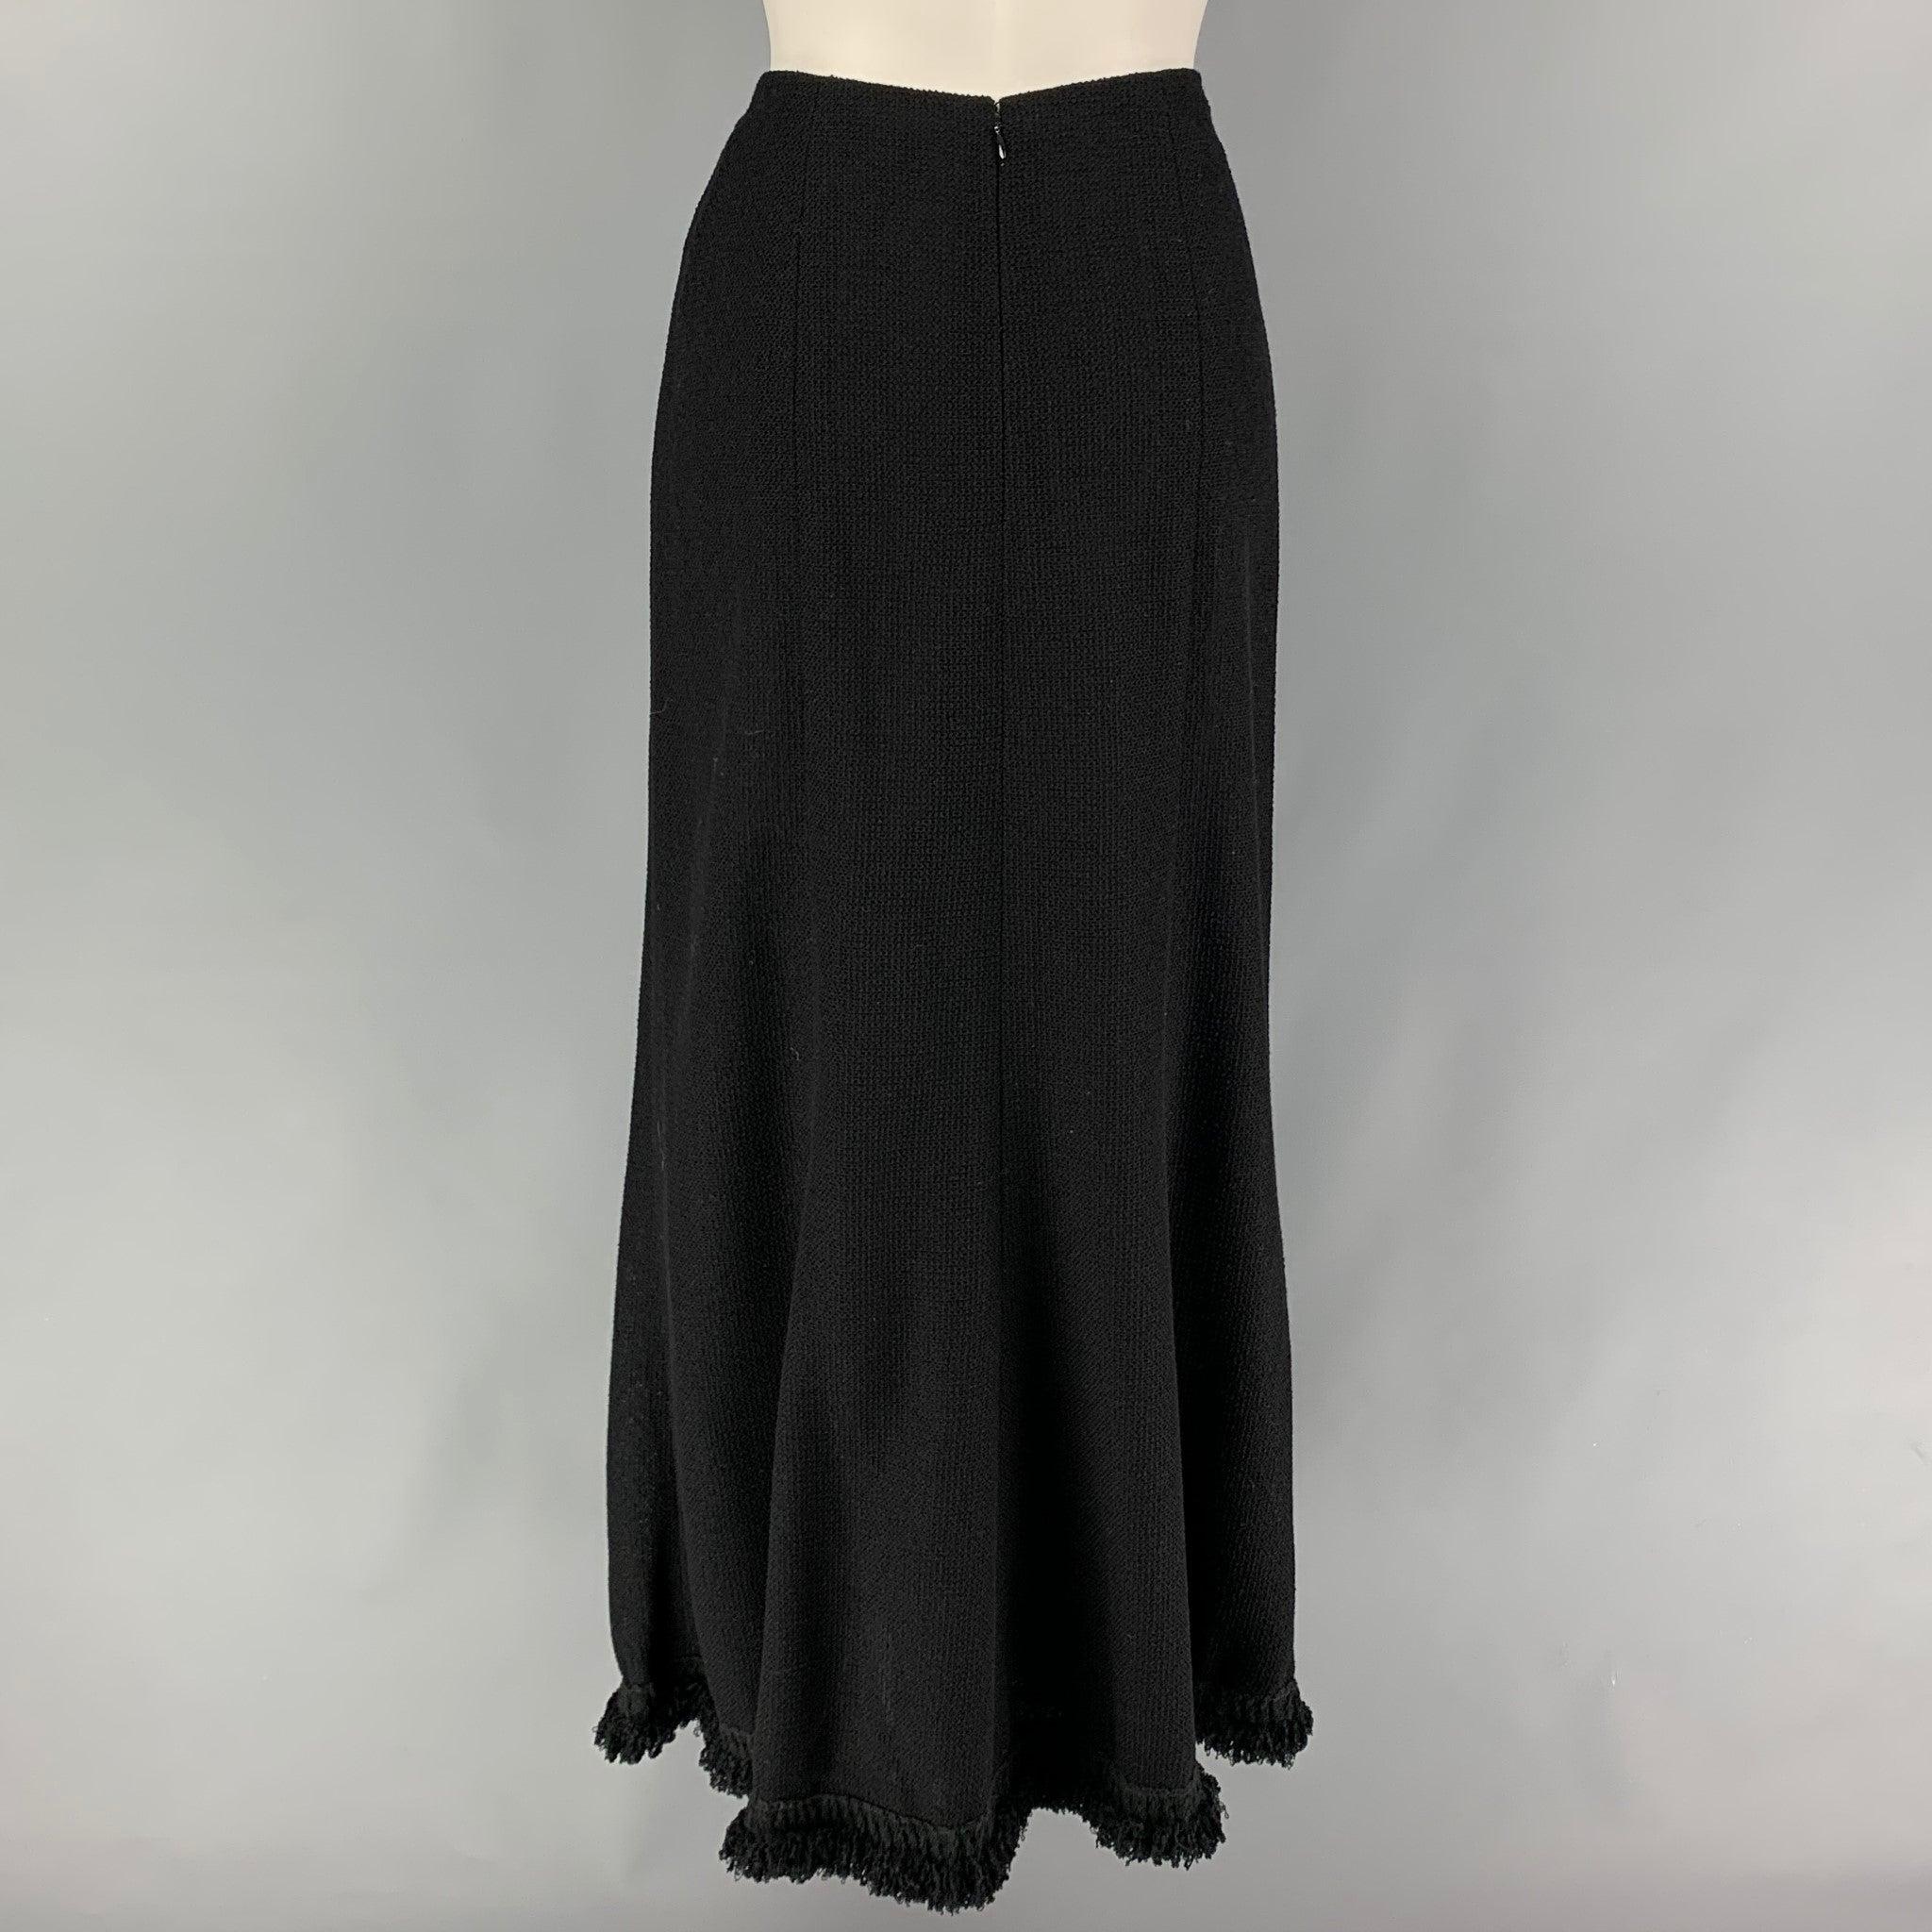 CHANEL Size 4 Black Wool Blend Textured Long Skirt In Good Condition For Sale In San Francisco, CA